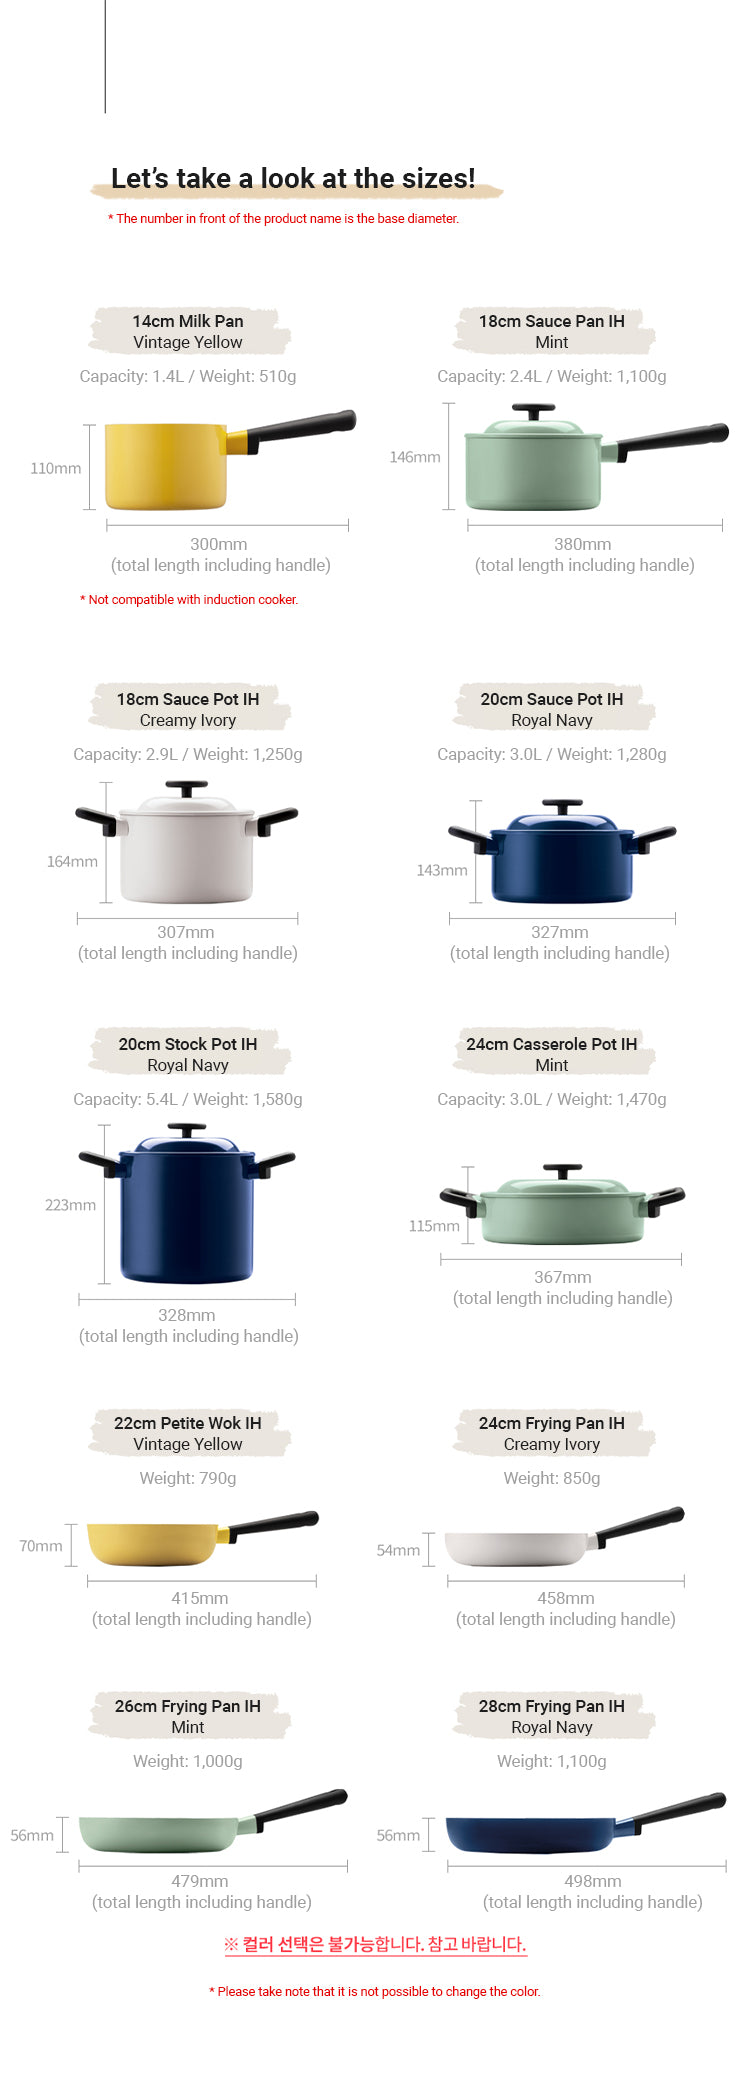 Decore Pots and Pans come in different sizes.